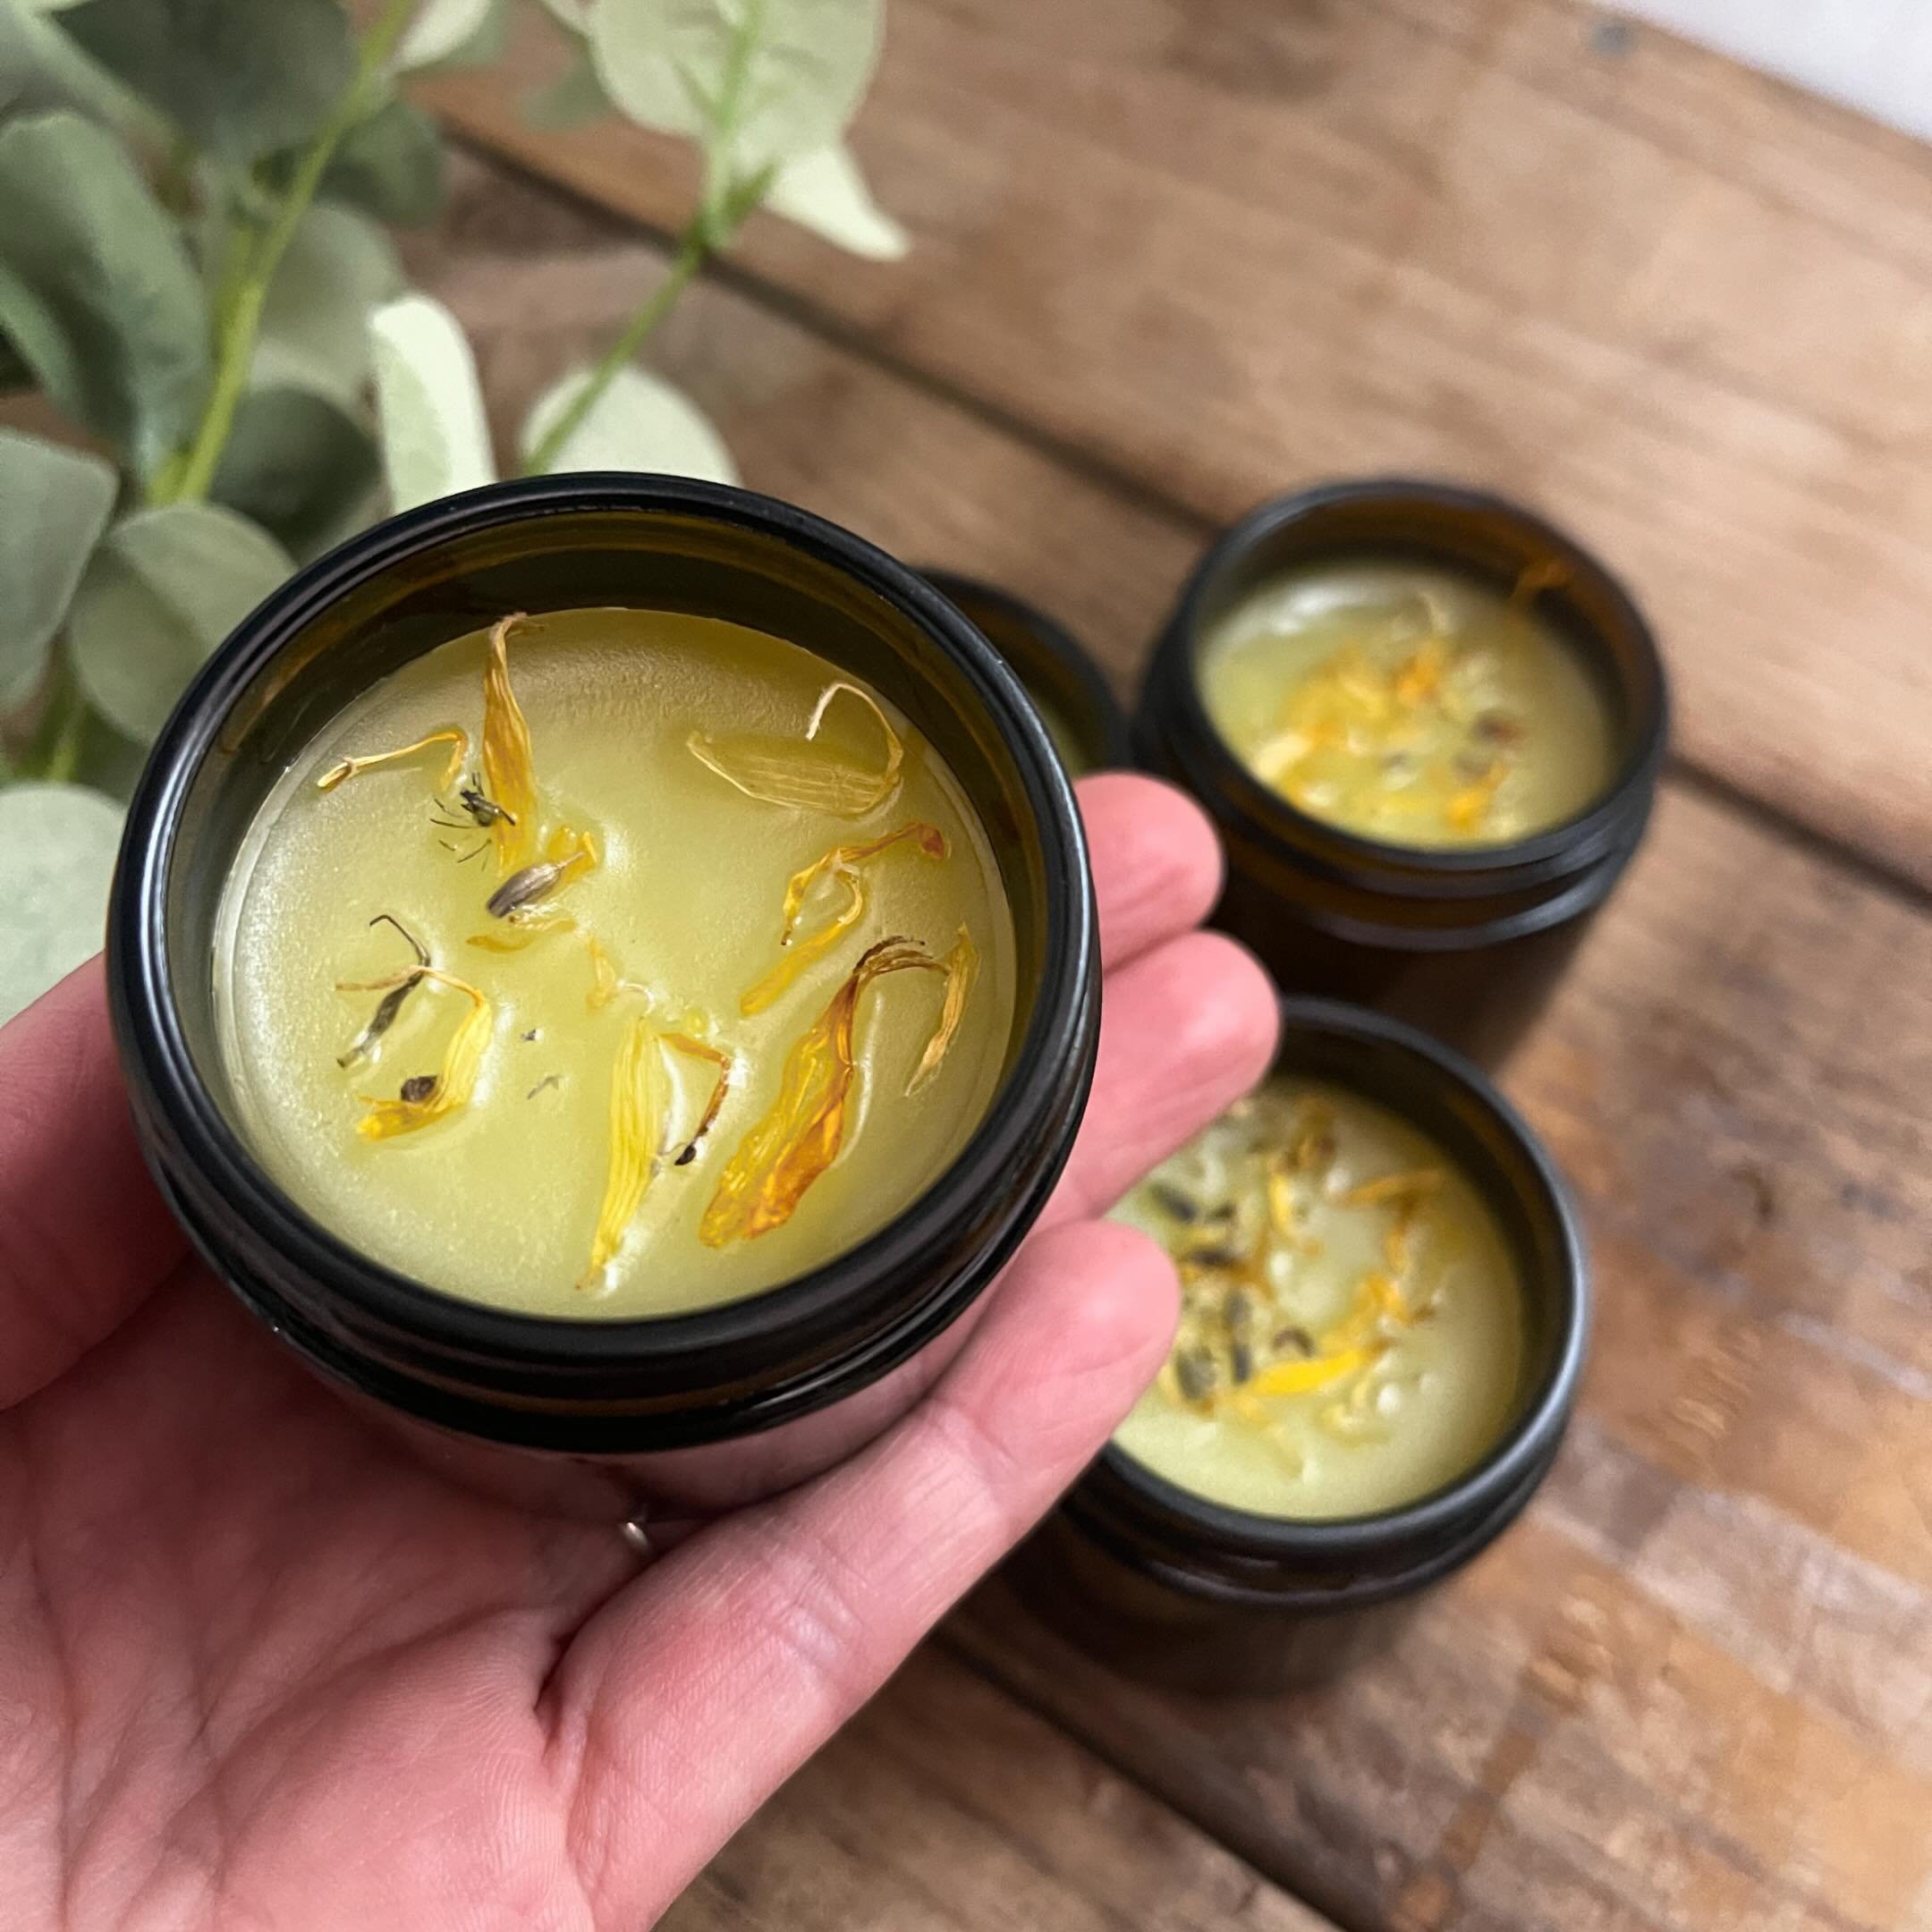 Heal salve 🌱 legit heals burns, scratches, scars, dry itchy skin. It&rsquo;s powered by local raw beeswax, Calendula flower infused organic fractionated coconut oil and shea butter with lavender. 

✌🏼 💚 
The Green Cottage
organic body &amp; home e